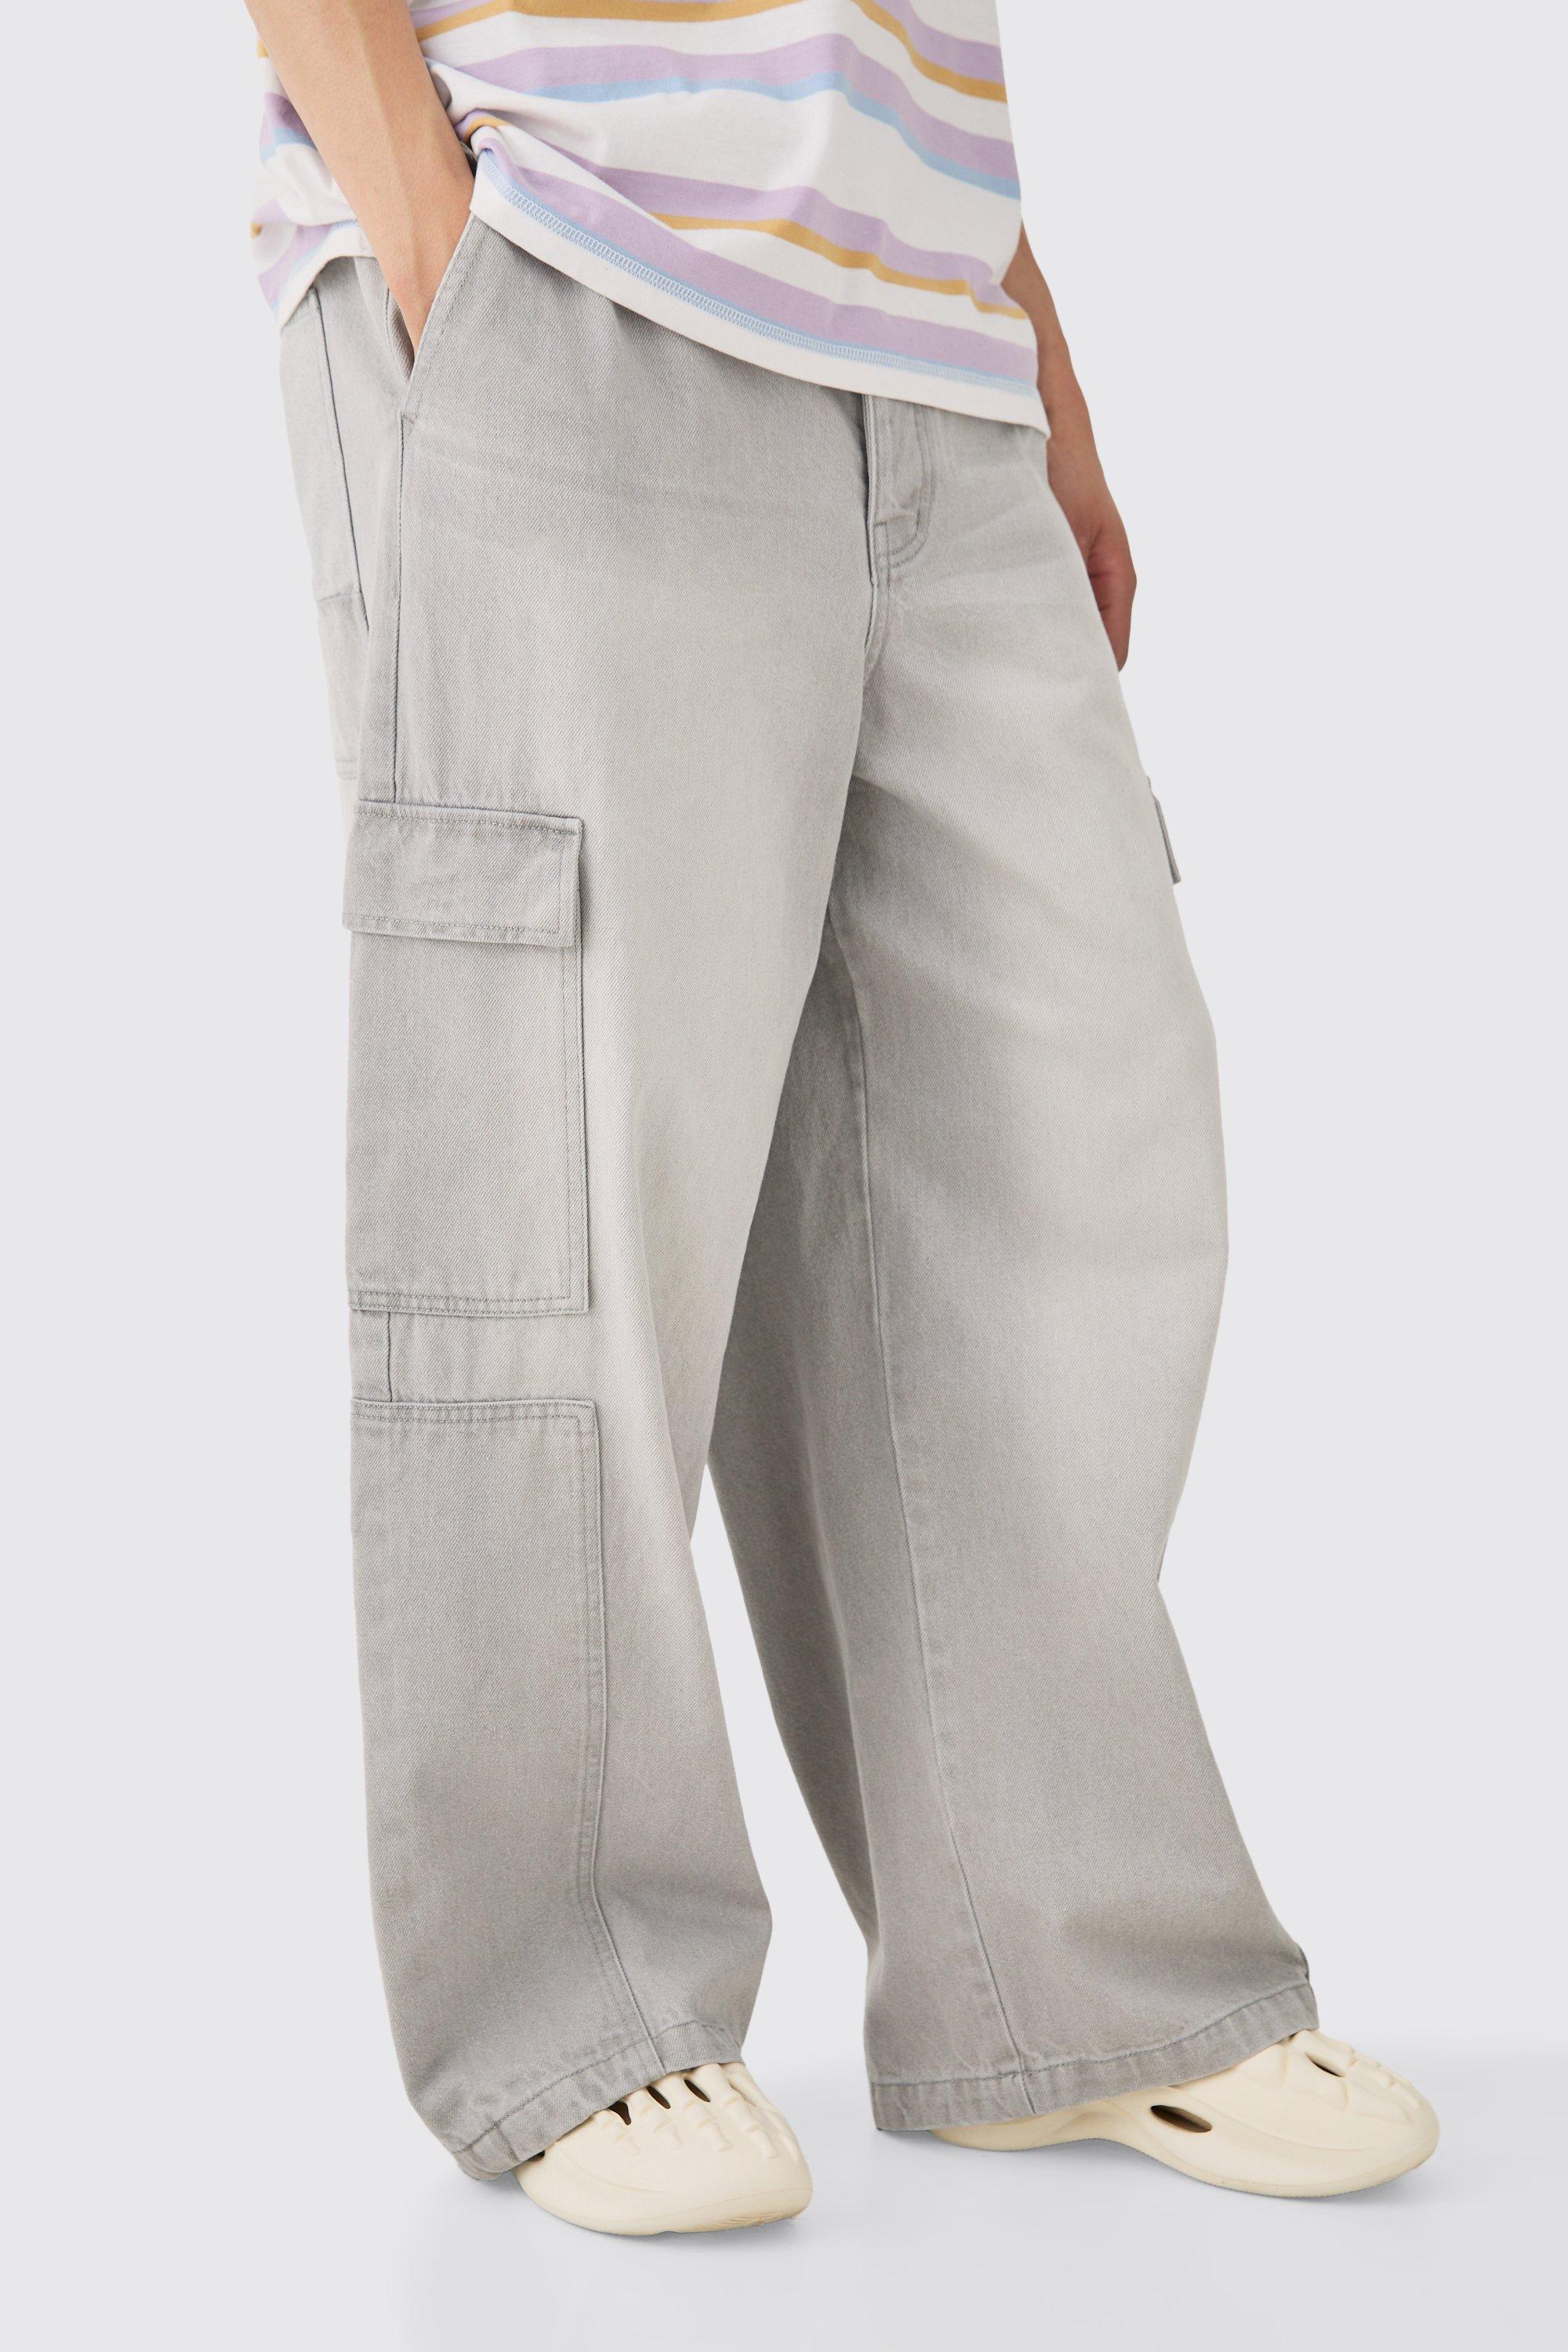 Image of Elasticated Waist Extreme Wide Fit Cargo Jeans In Grey, Grigio